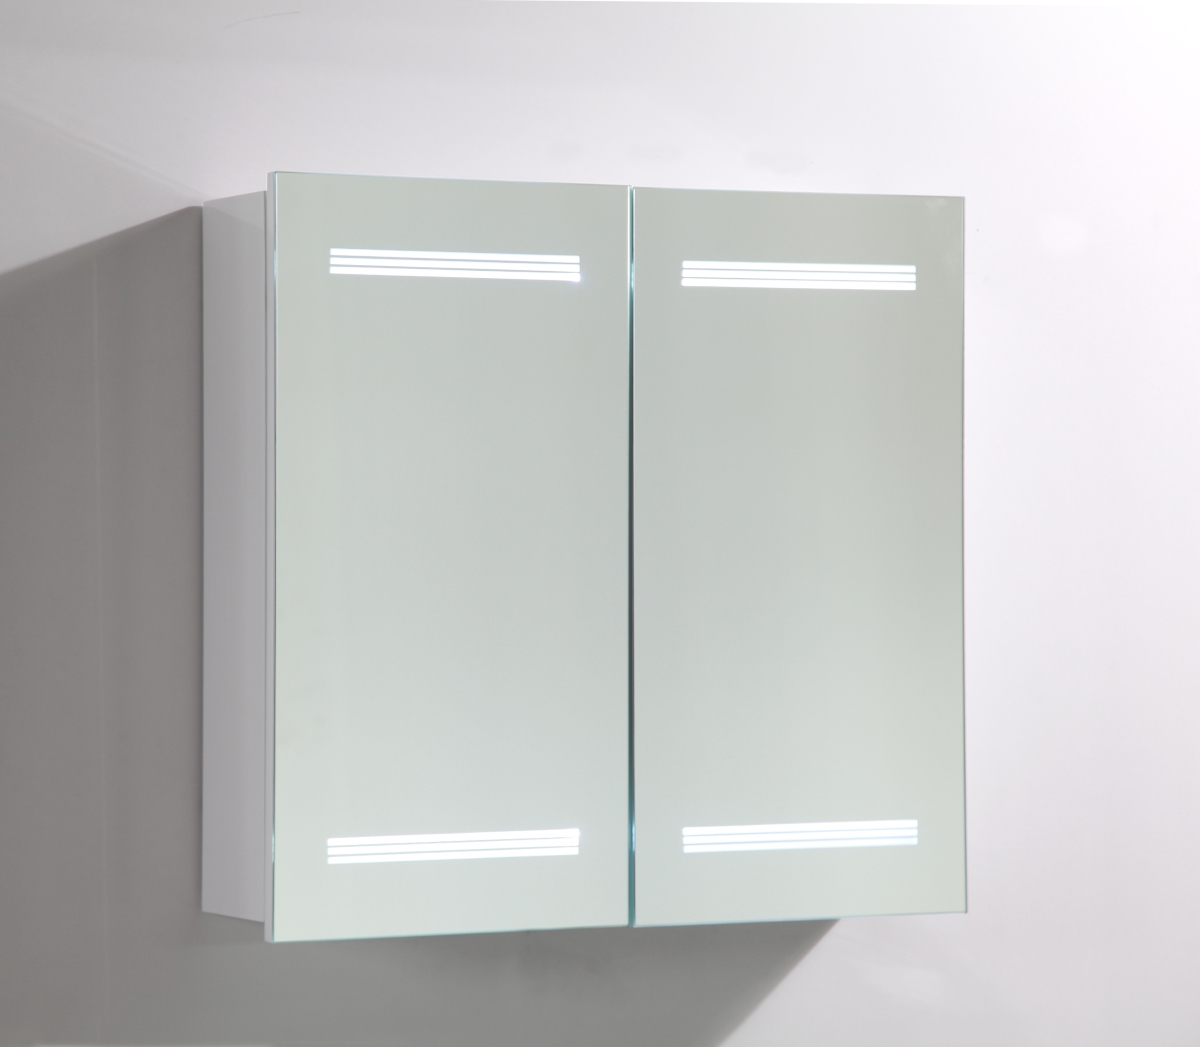 Picture of Vanity Art VA7 LED Bathroom Mirror Medicine Cabinet with Rock Switch - 25 x 26 x 6 in.